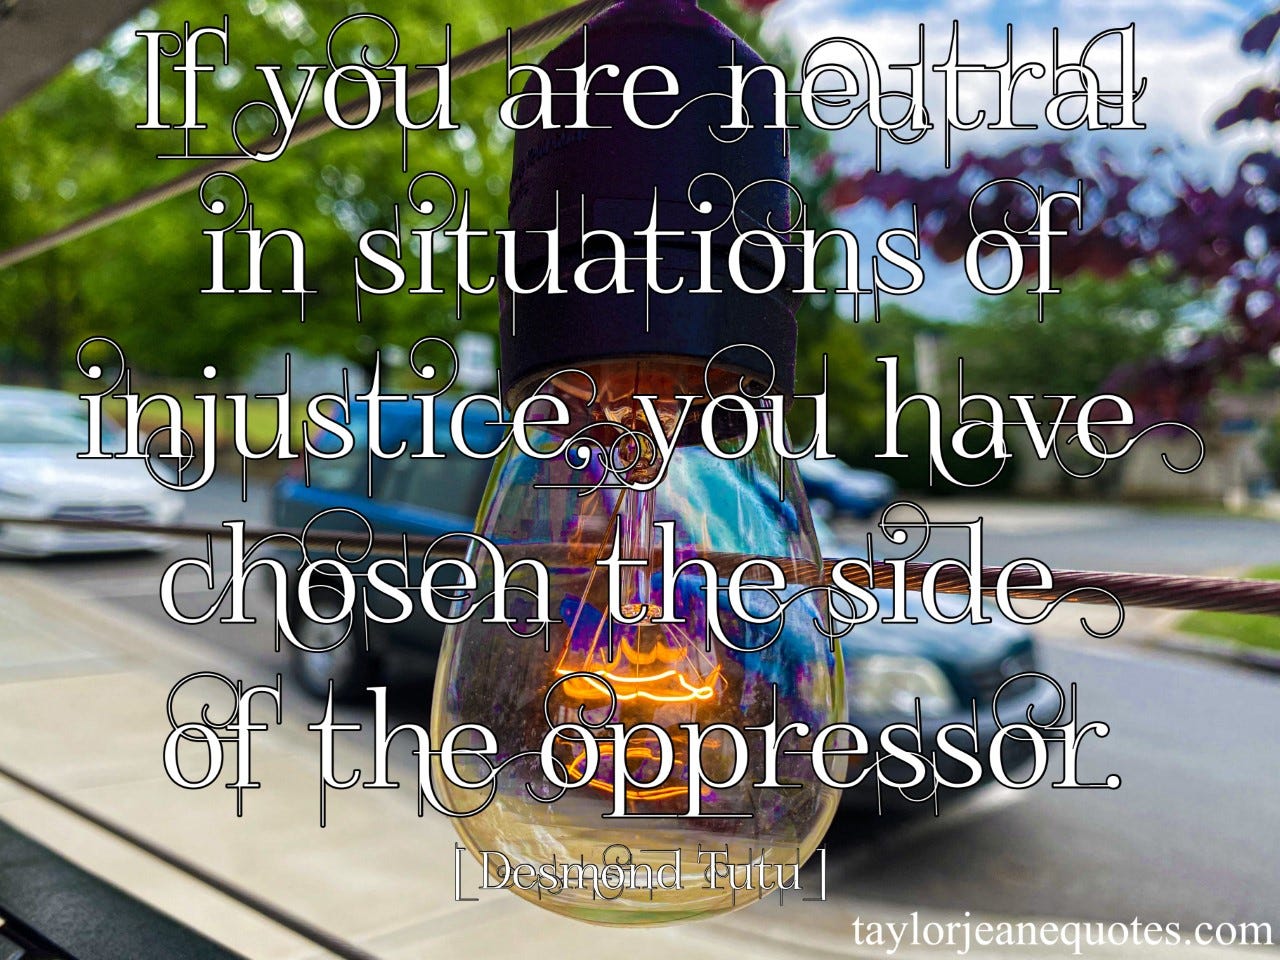 taylor jeane quotes, taylor jeane, taylor wilson, free motivational quote of the day, free positive quote of the day, desmond tutu, desmond tutu quotes, archbishop desmond tutu, archbishop desmond tutu quotes, injustice quotes, do the right thing quotes, justice quotes, bullying quotes, stand up for others quotes, uplifting quotes, motivational quotes, inspirational quotes, positive quotes, life quotes, neutrality quotes, life quotes